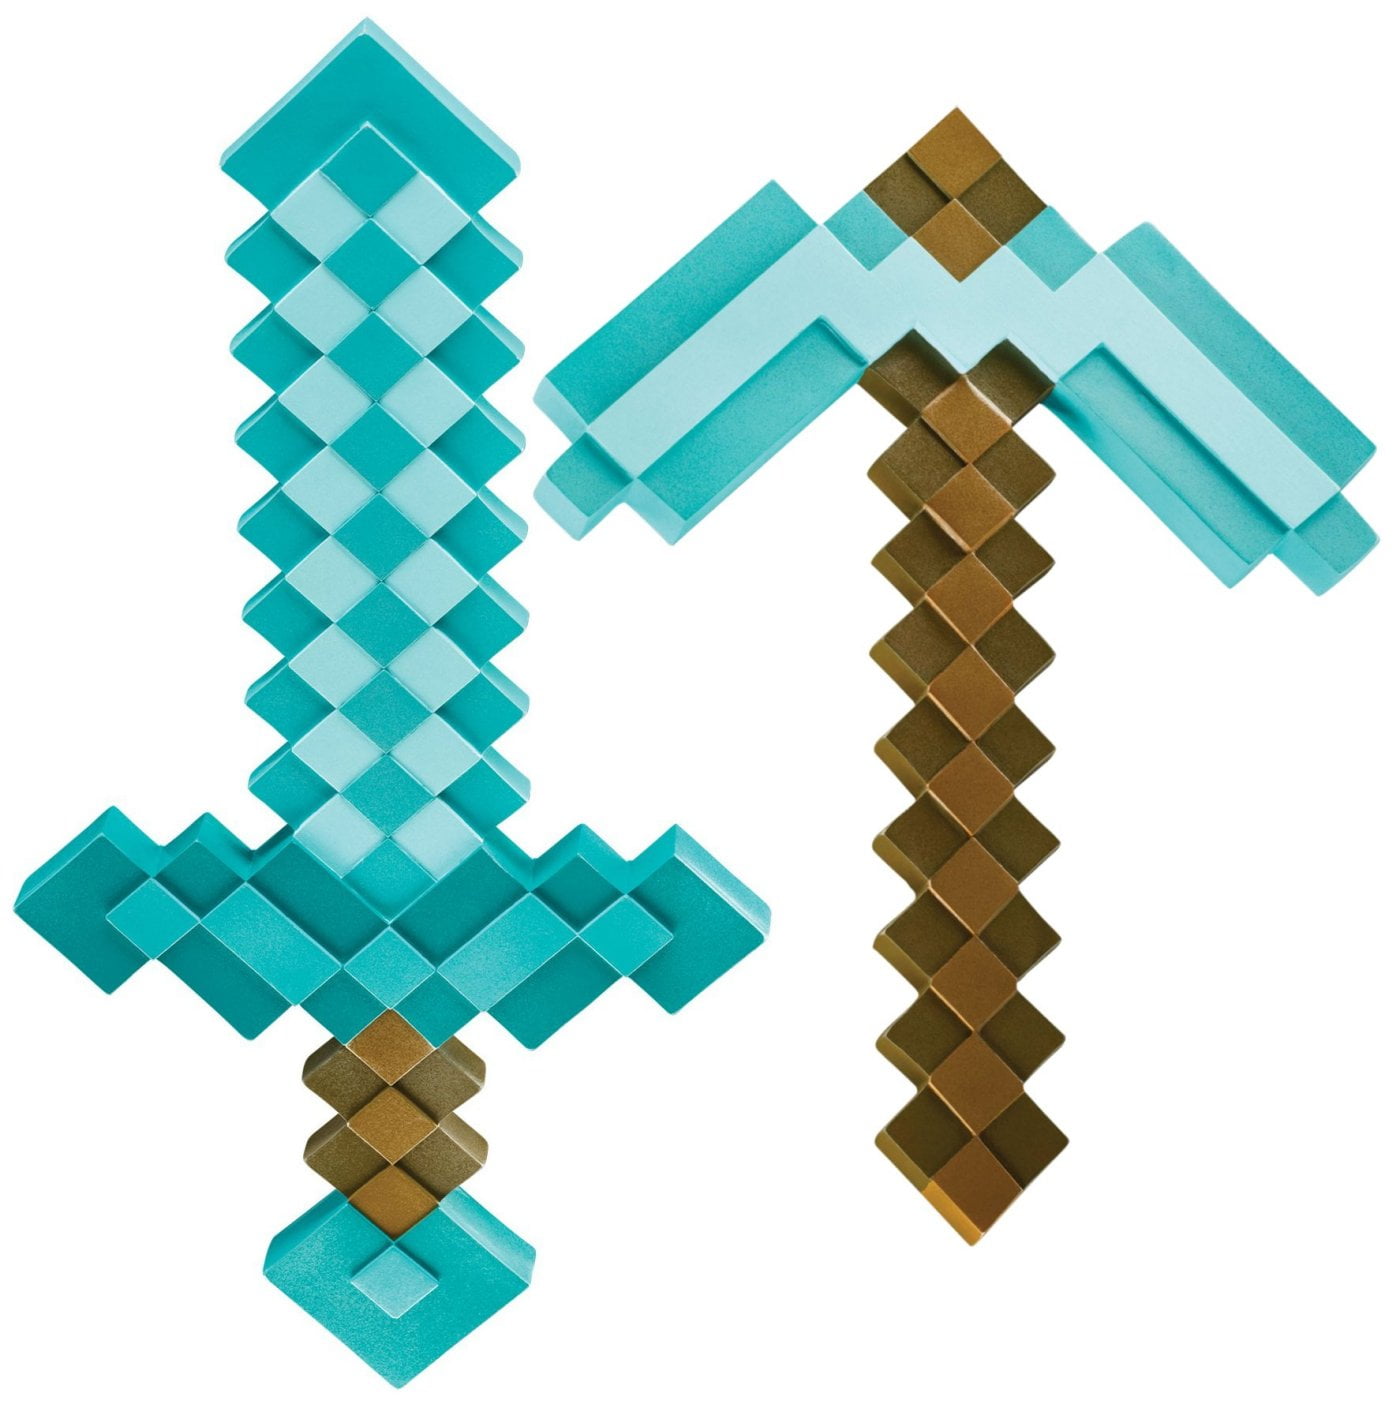 Sword vs Axe in Minecraft: which one is better?